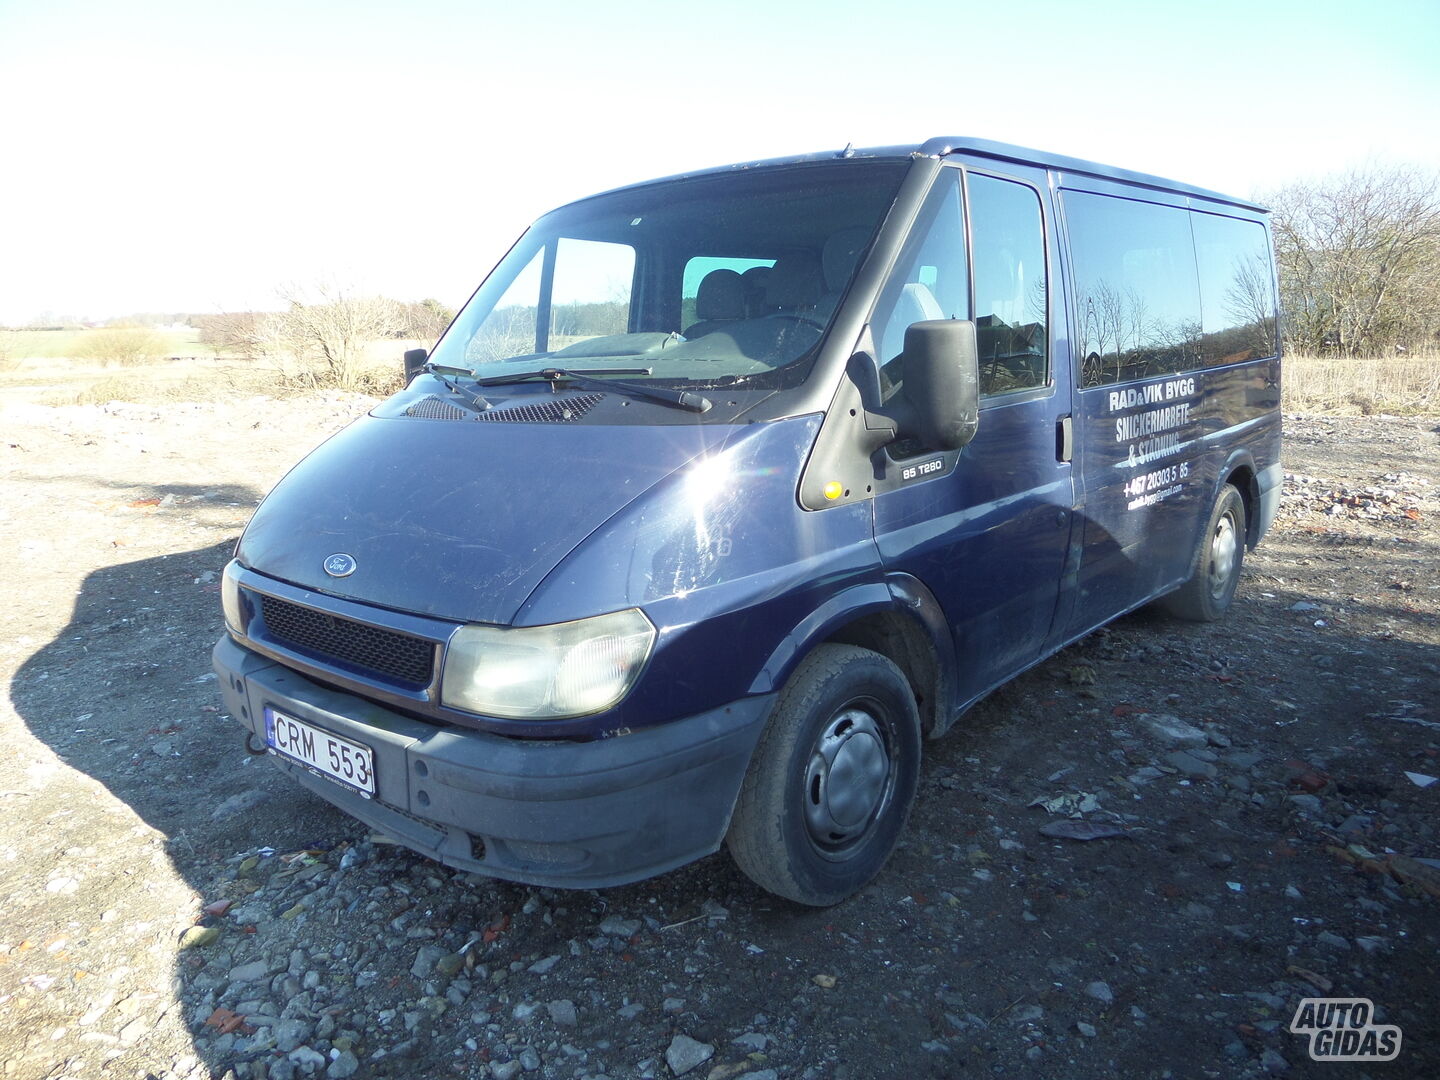 Ford Transit 2005 y parts